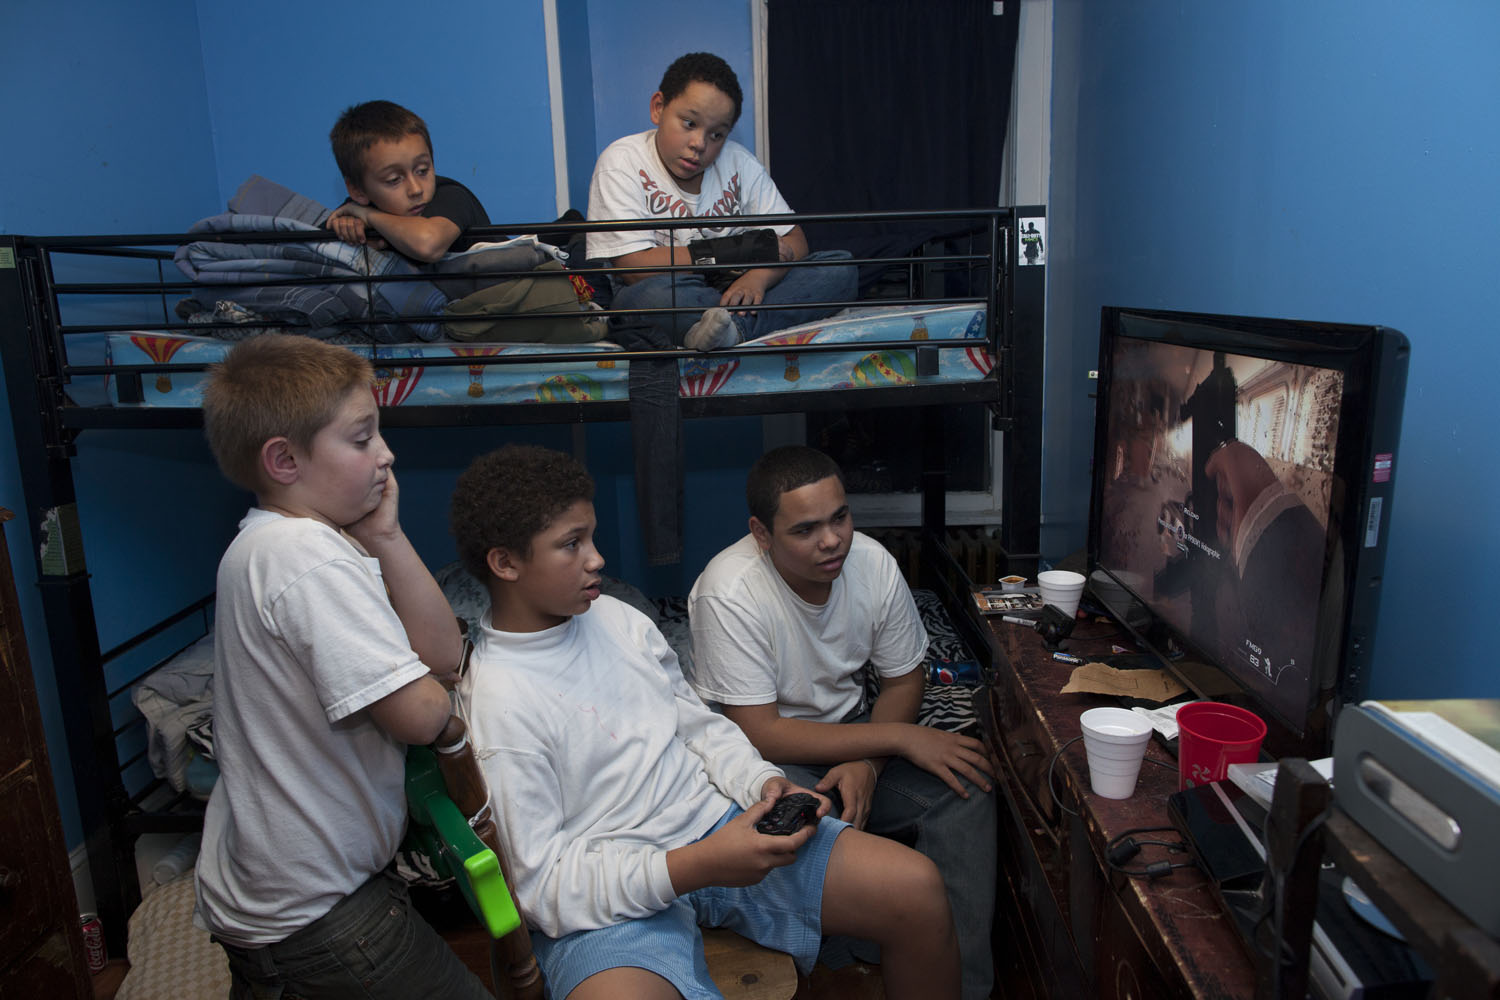 Donny watches as his uncle Little John and his friends play Call of Duty.